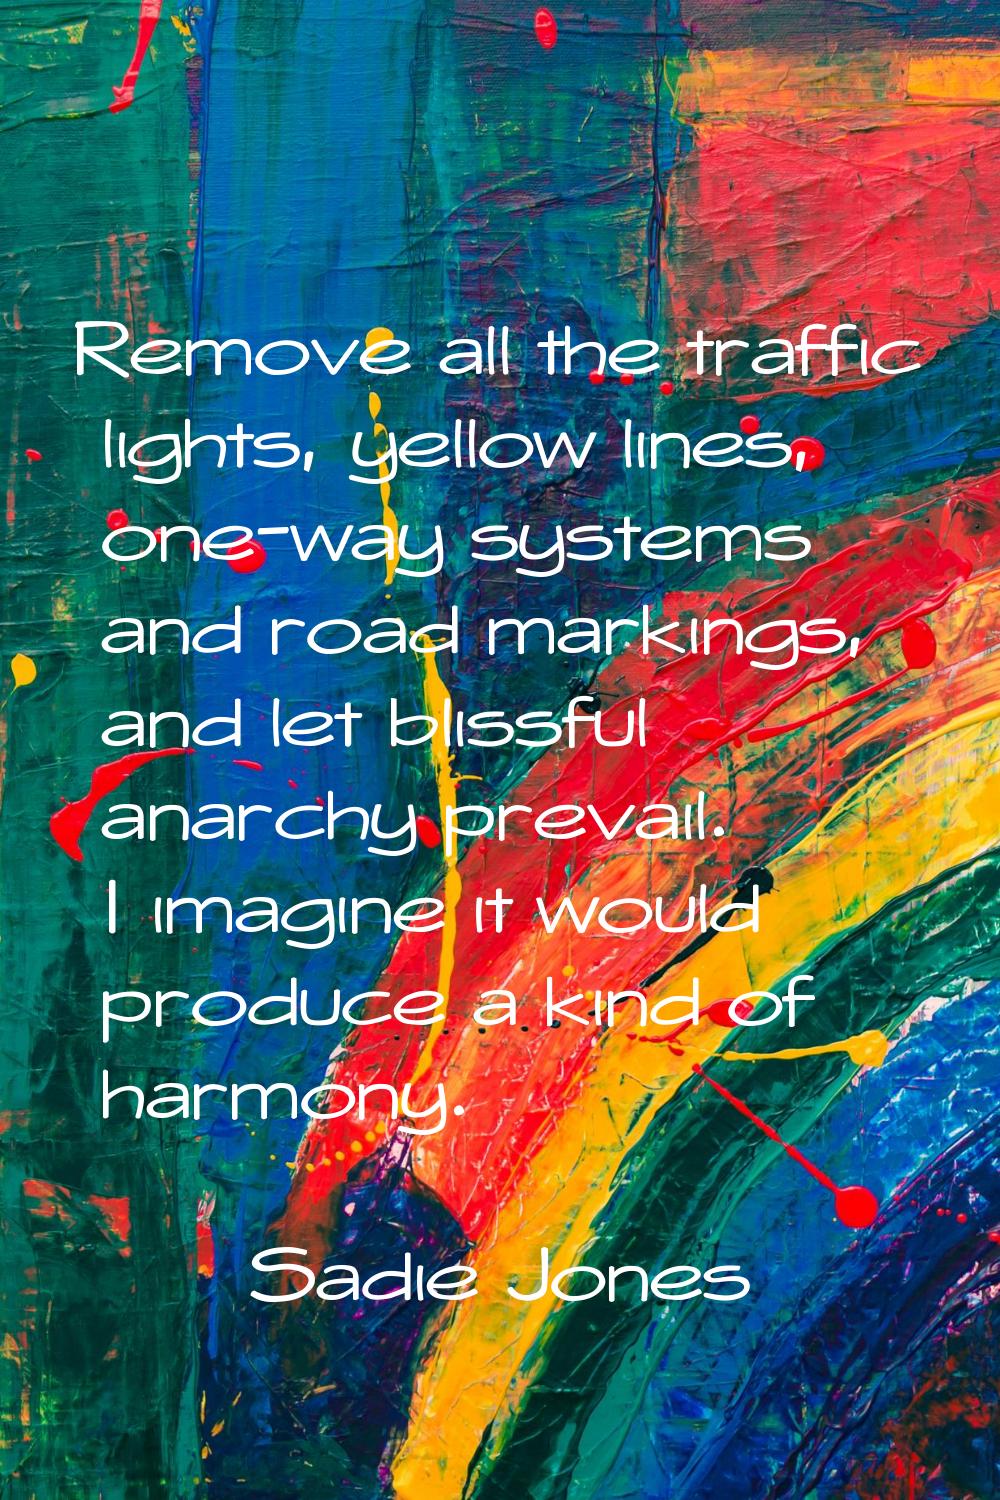 Remove all the traffic lights, yellow lines, one-way systems and road markings, and let blissful an